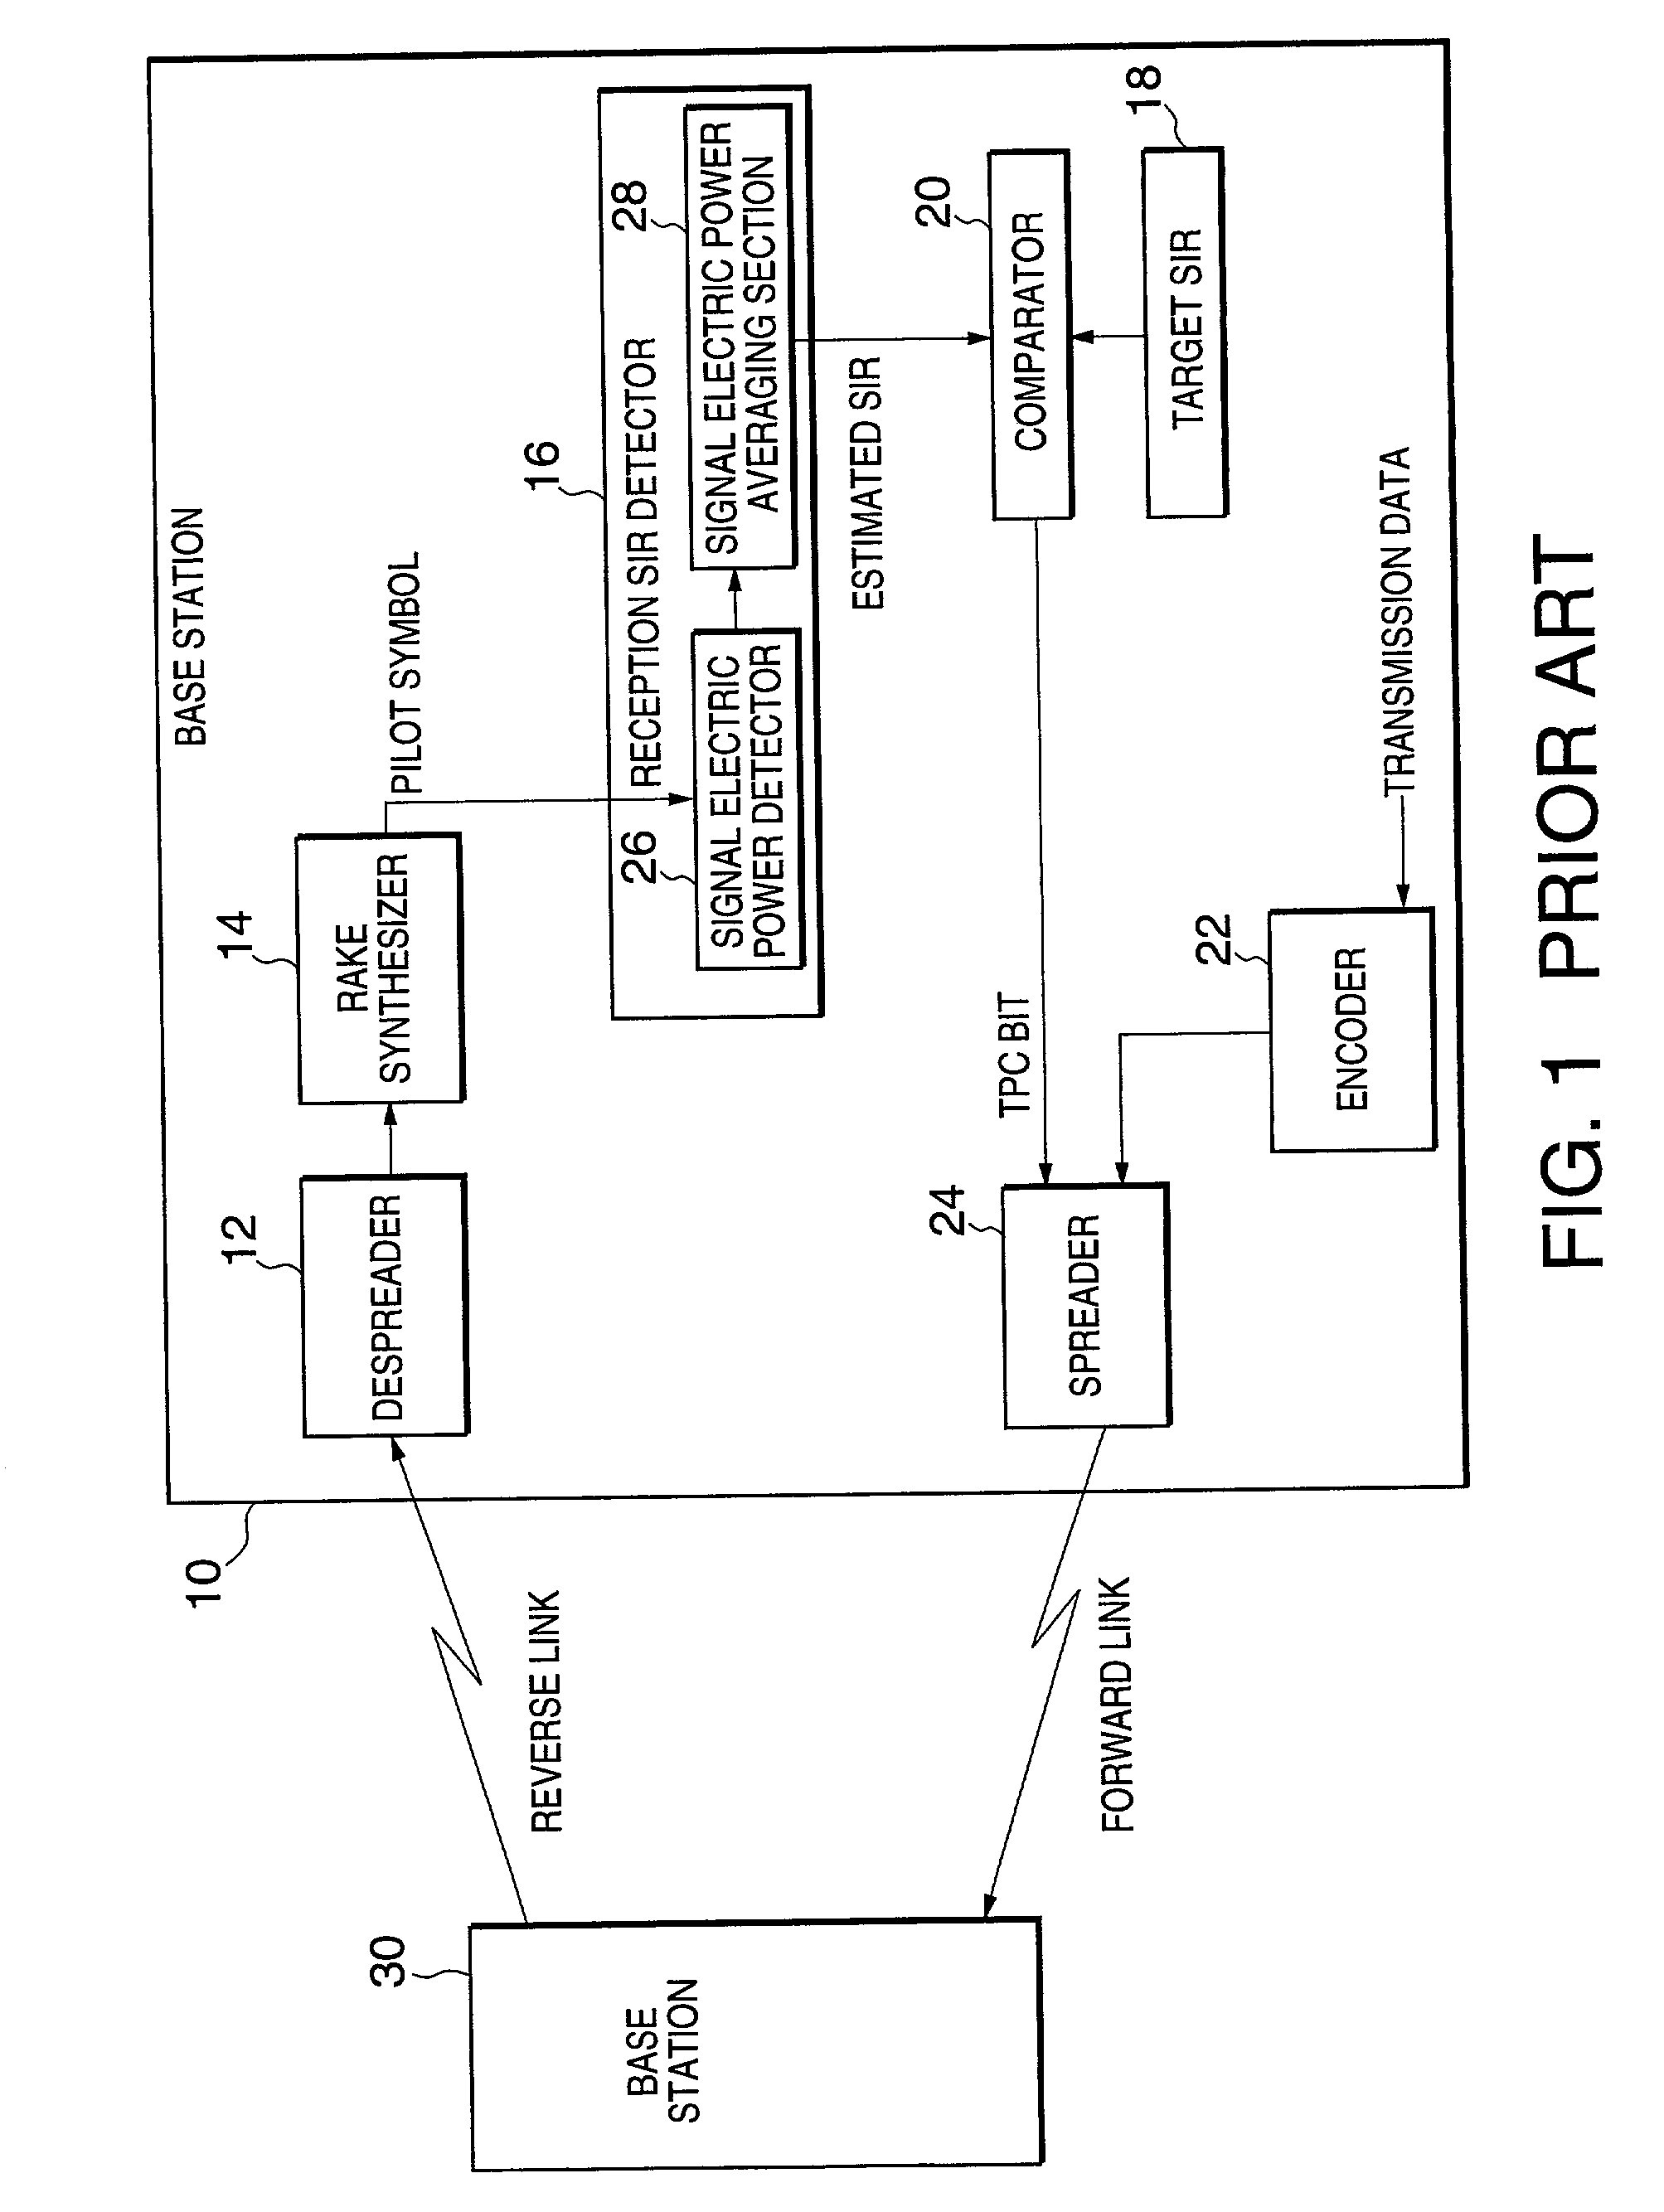 CDMA transmission power control in variable control cycle